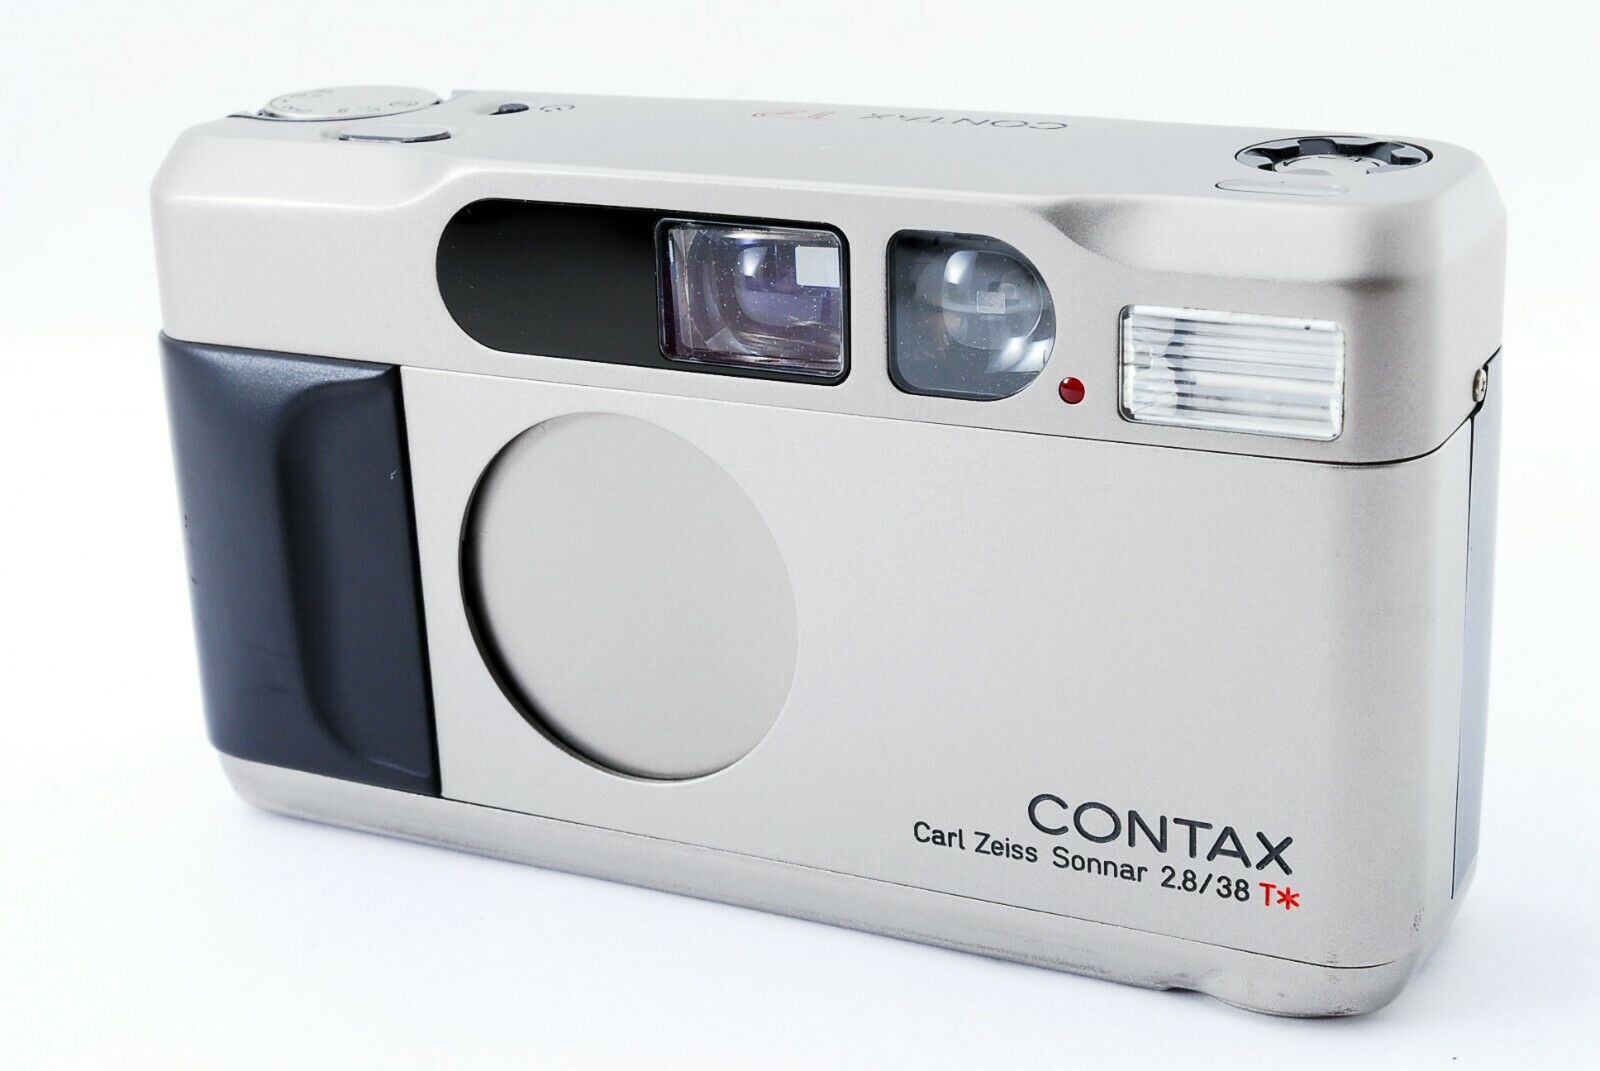 [mint] Contax T2 Point ＆ Shoot 35mm Film Camera From Japan